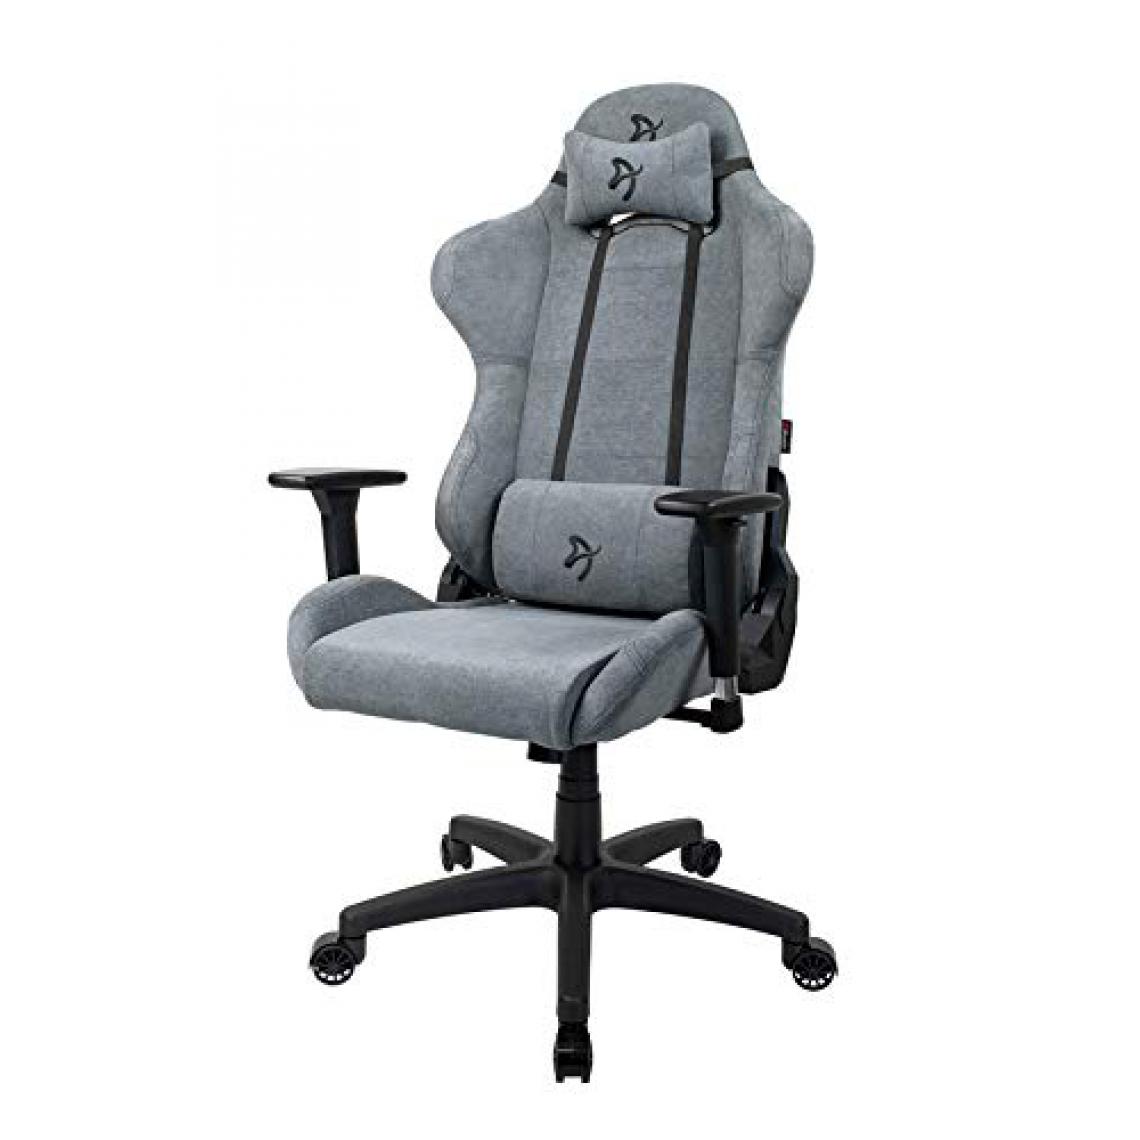 Arozzi - Fauteuil gaming Torretta Soft Fabric Arozzi gris clair - Chaise gamer